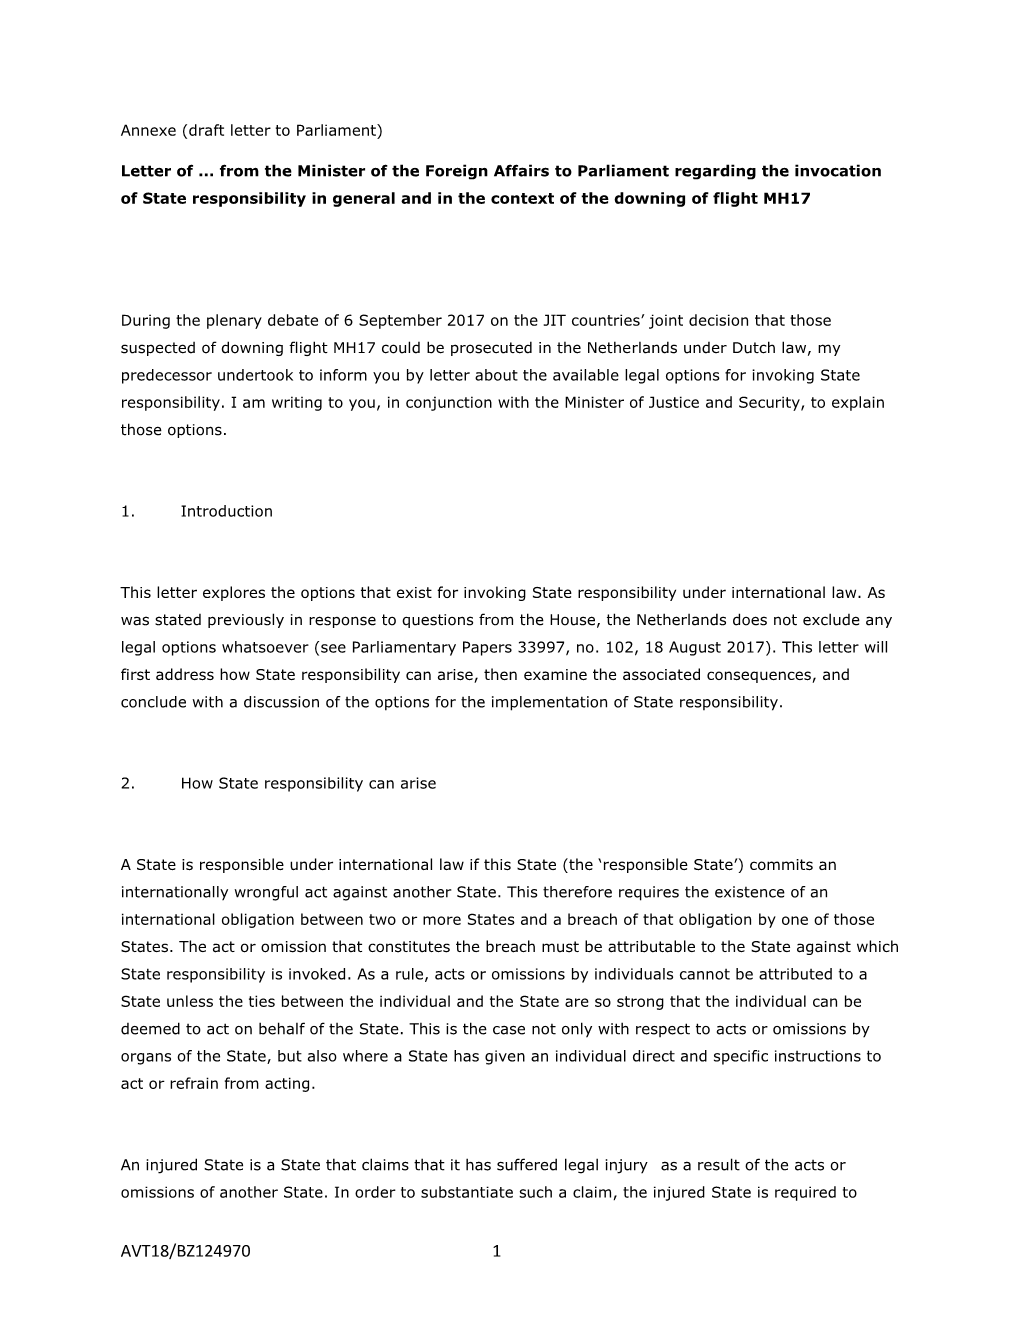 Letter+To+Parliament+MH17.Pdf